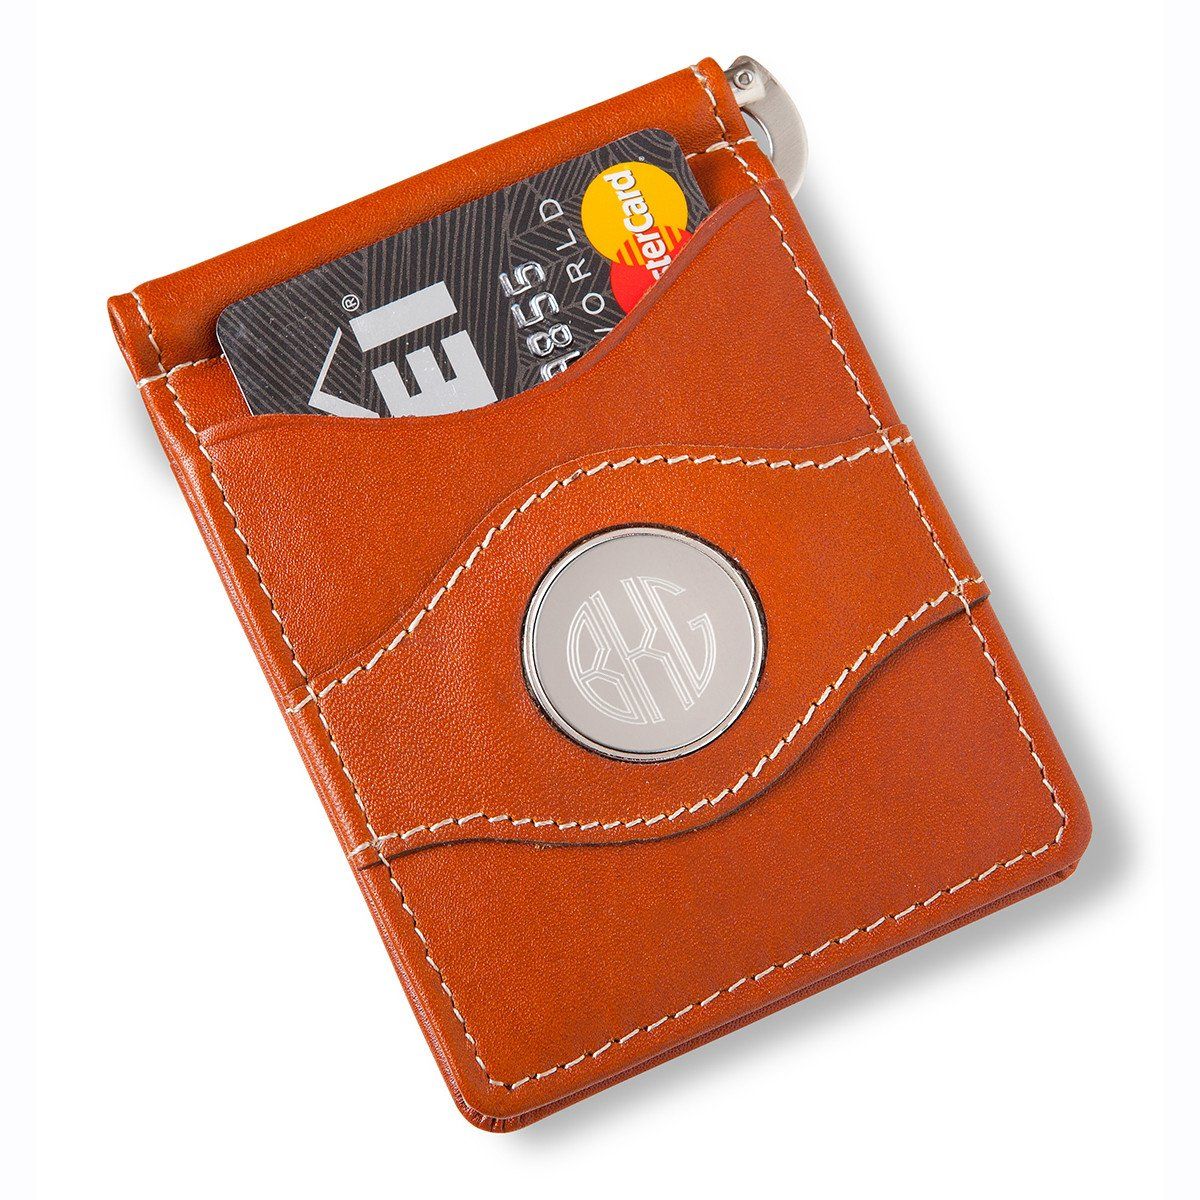 Pin on wallet's